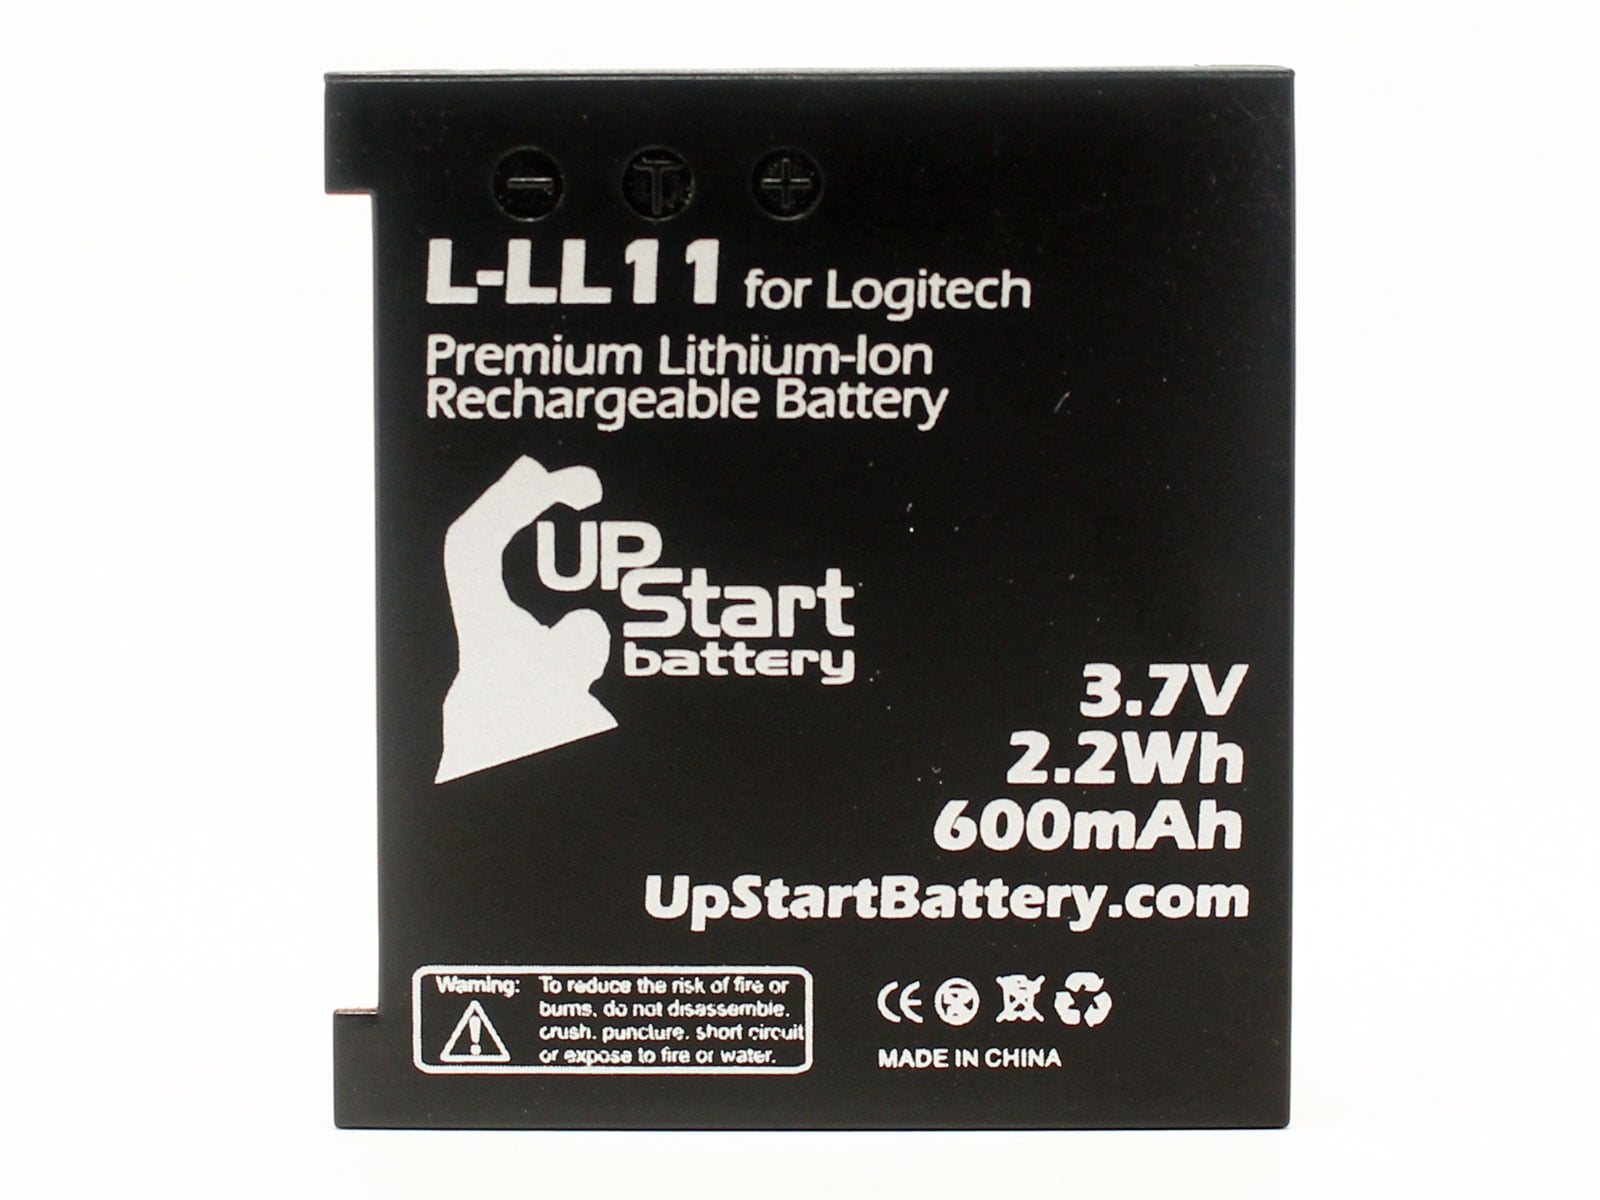 600mAh, 3.7V, Lithium-Ion Logitech G7 Battery Replacement for Logitech L-LL11 Mouse Battery 2X Pack